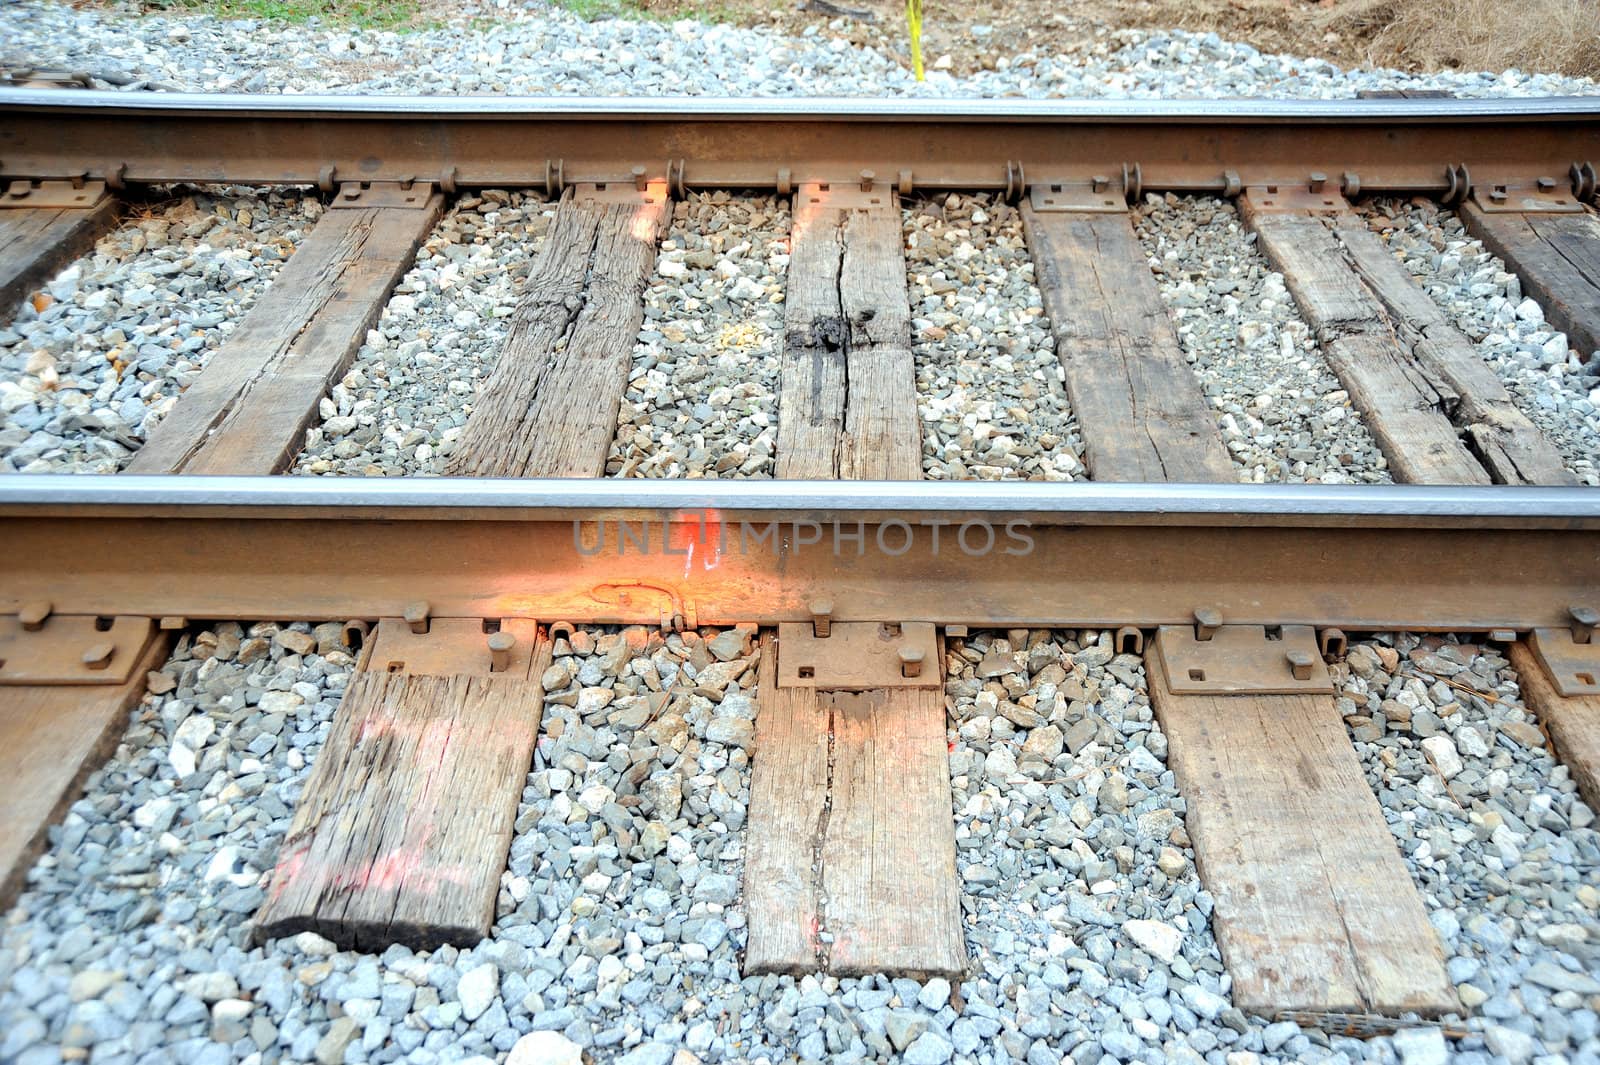 Railroad tracks in an isolated place.